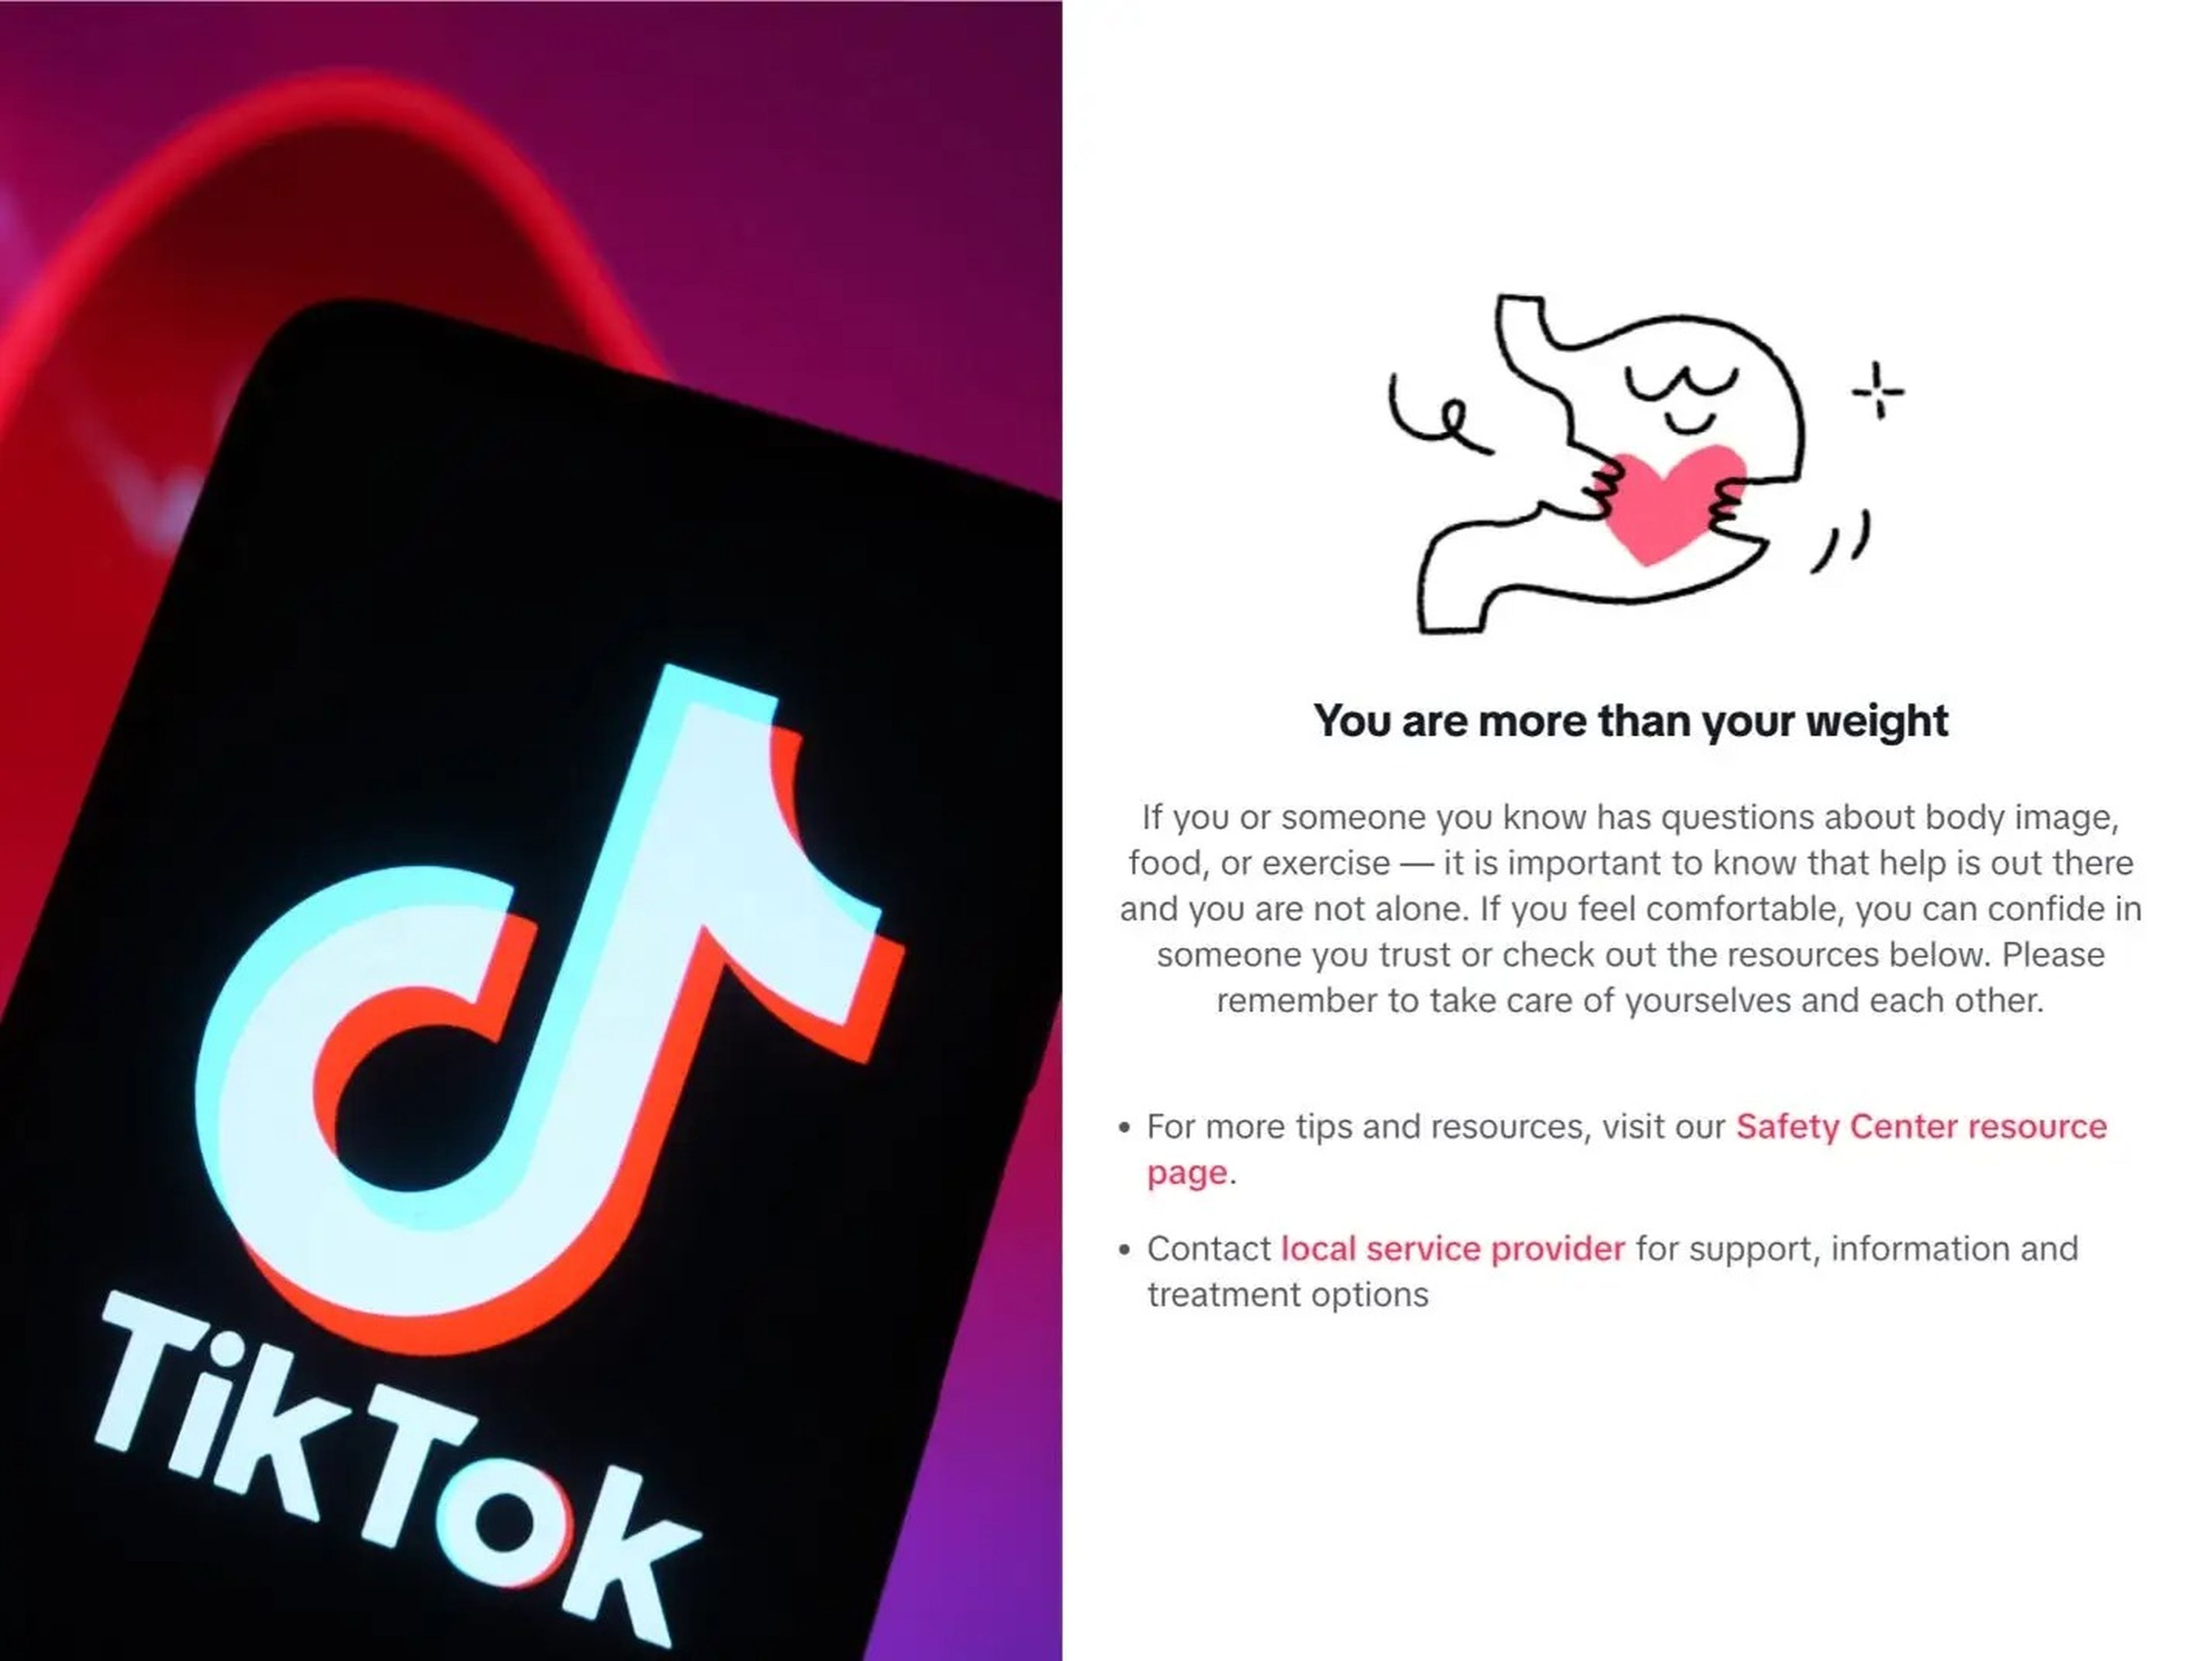 tiktok logo and weight loss community guideline